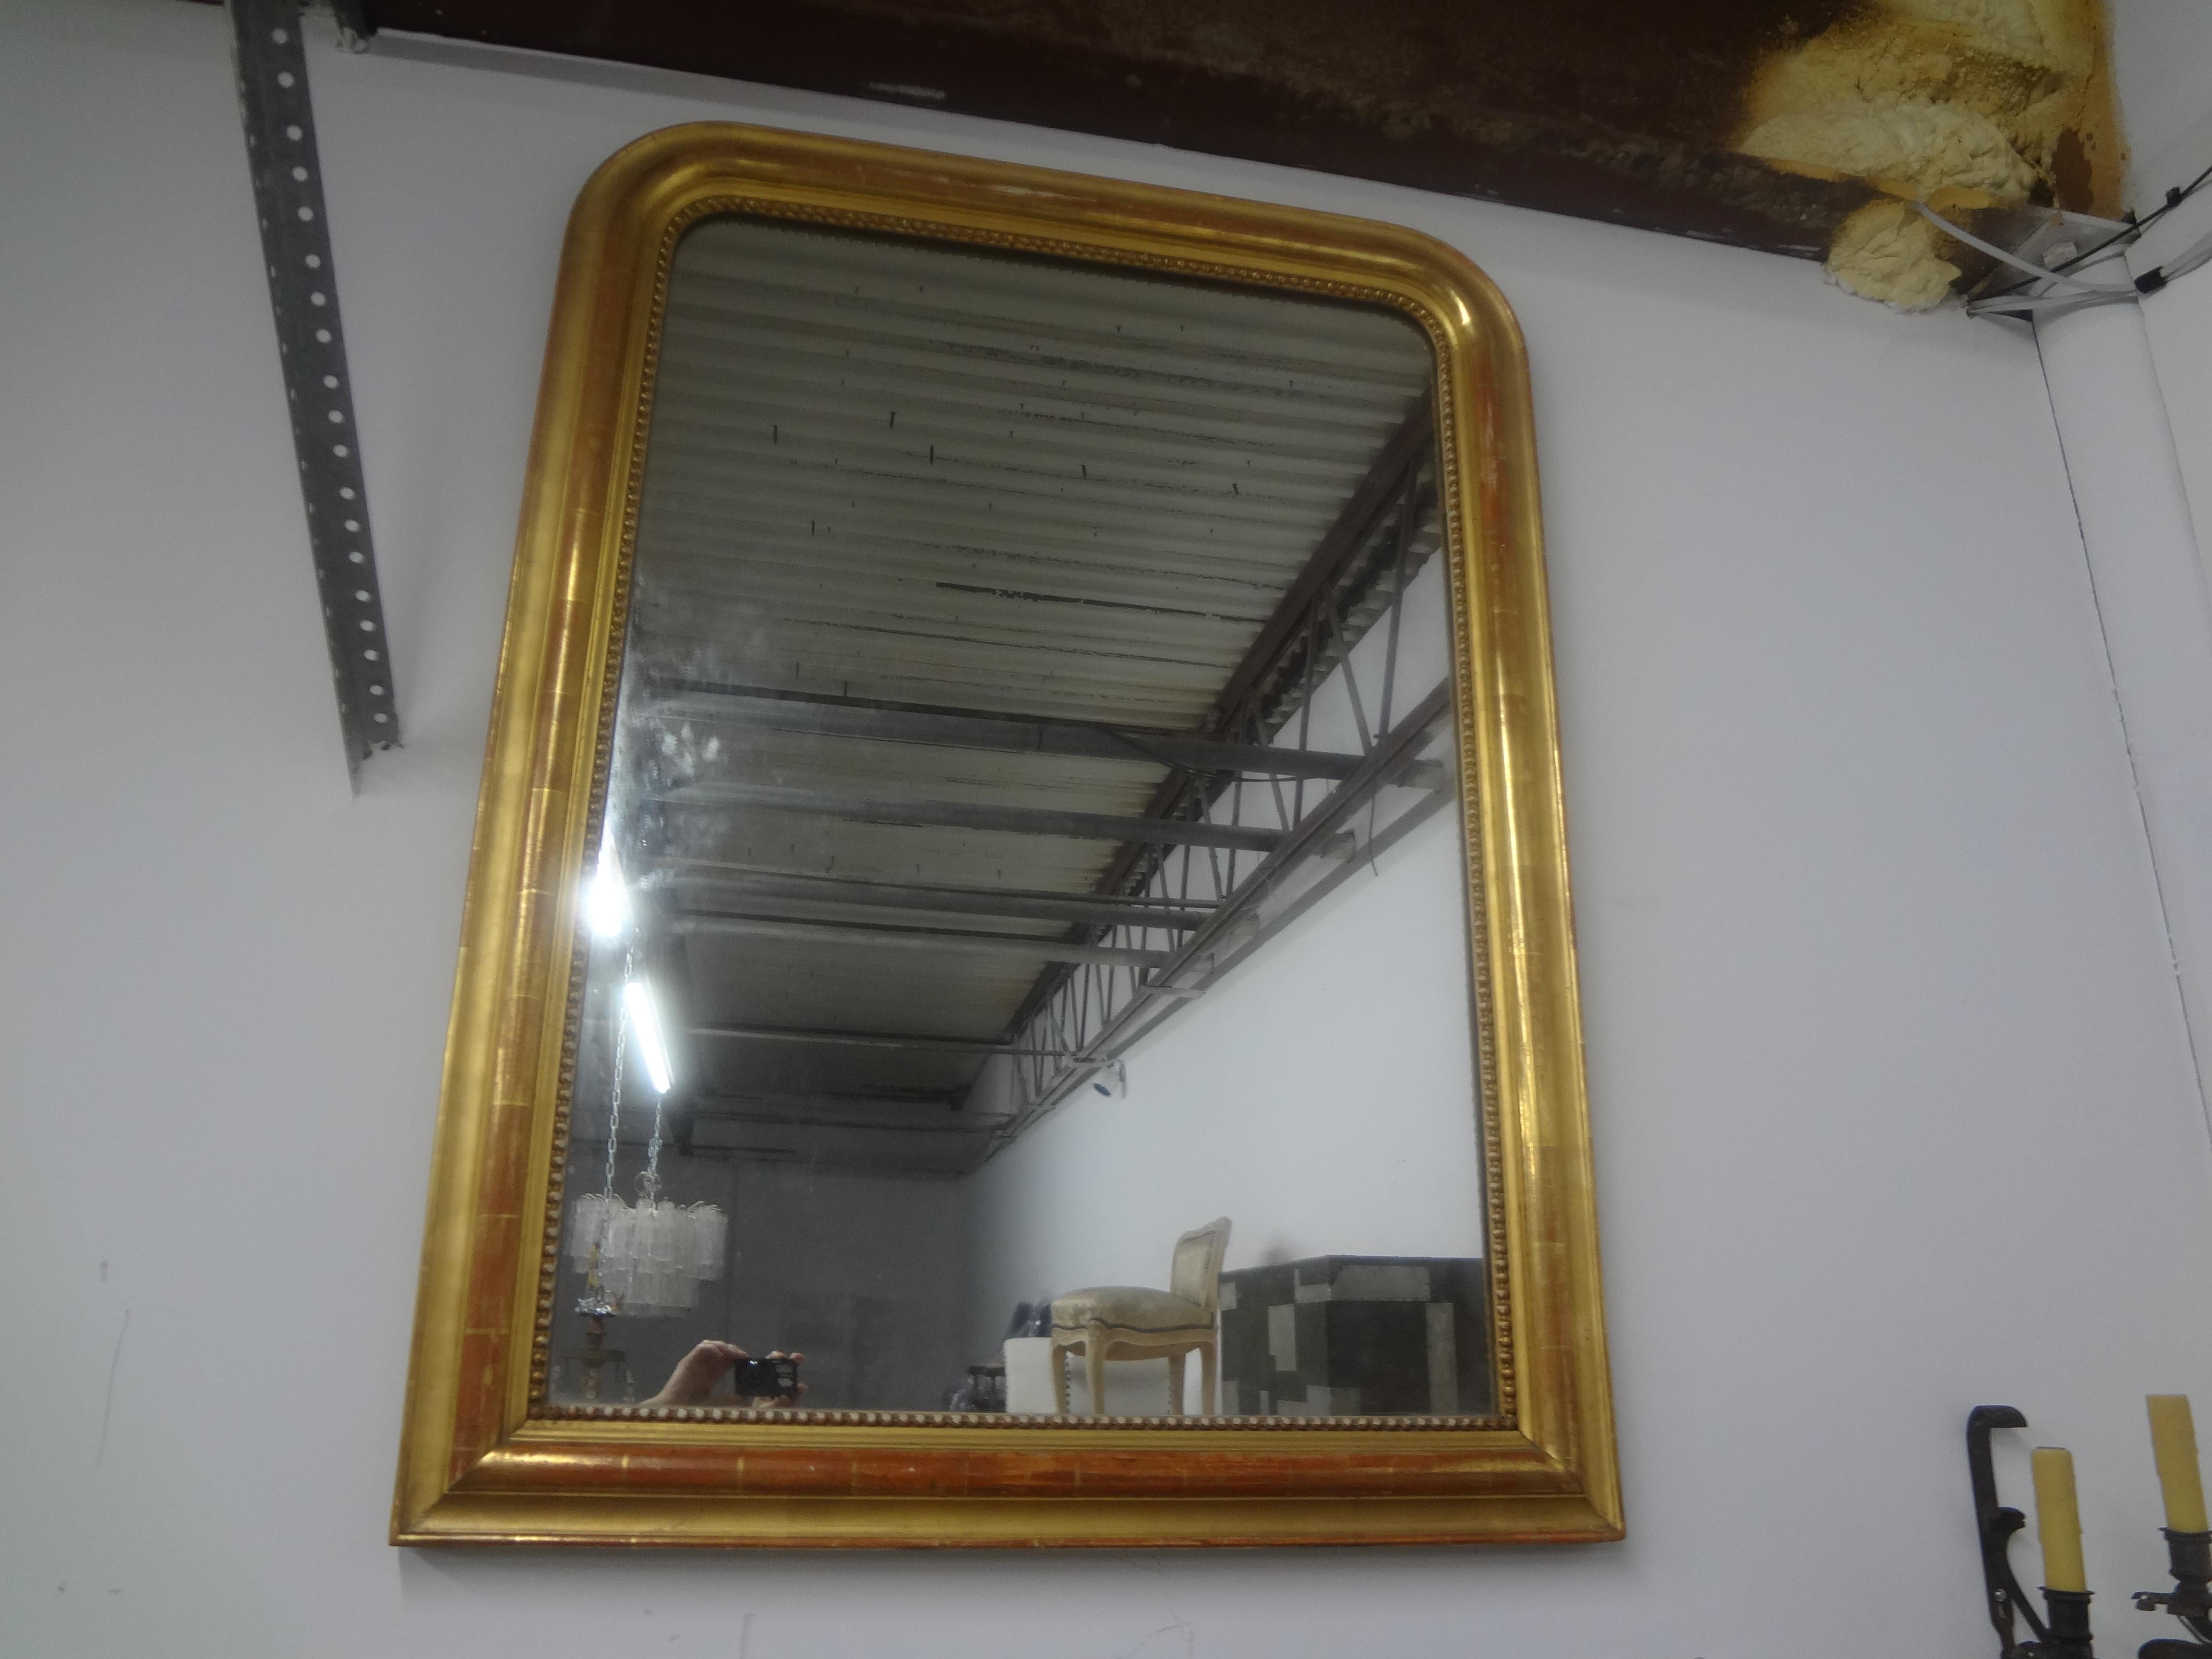 19th Century French Louis Philippe Giltwood Mirror.
This stunning period antique French Louis Philippe gilt wood mirror has gorgeous patina and clean lines that are perfect in any decor.